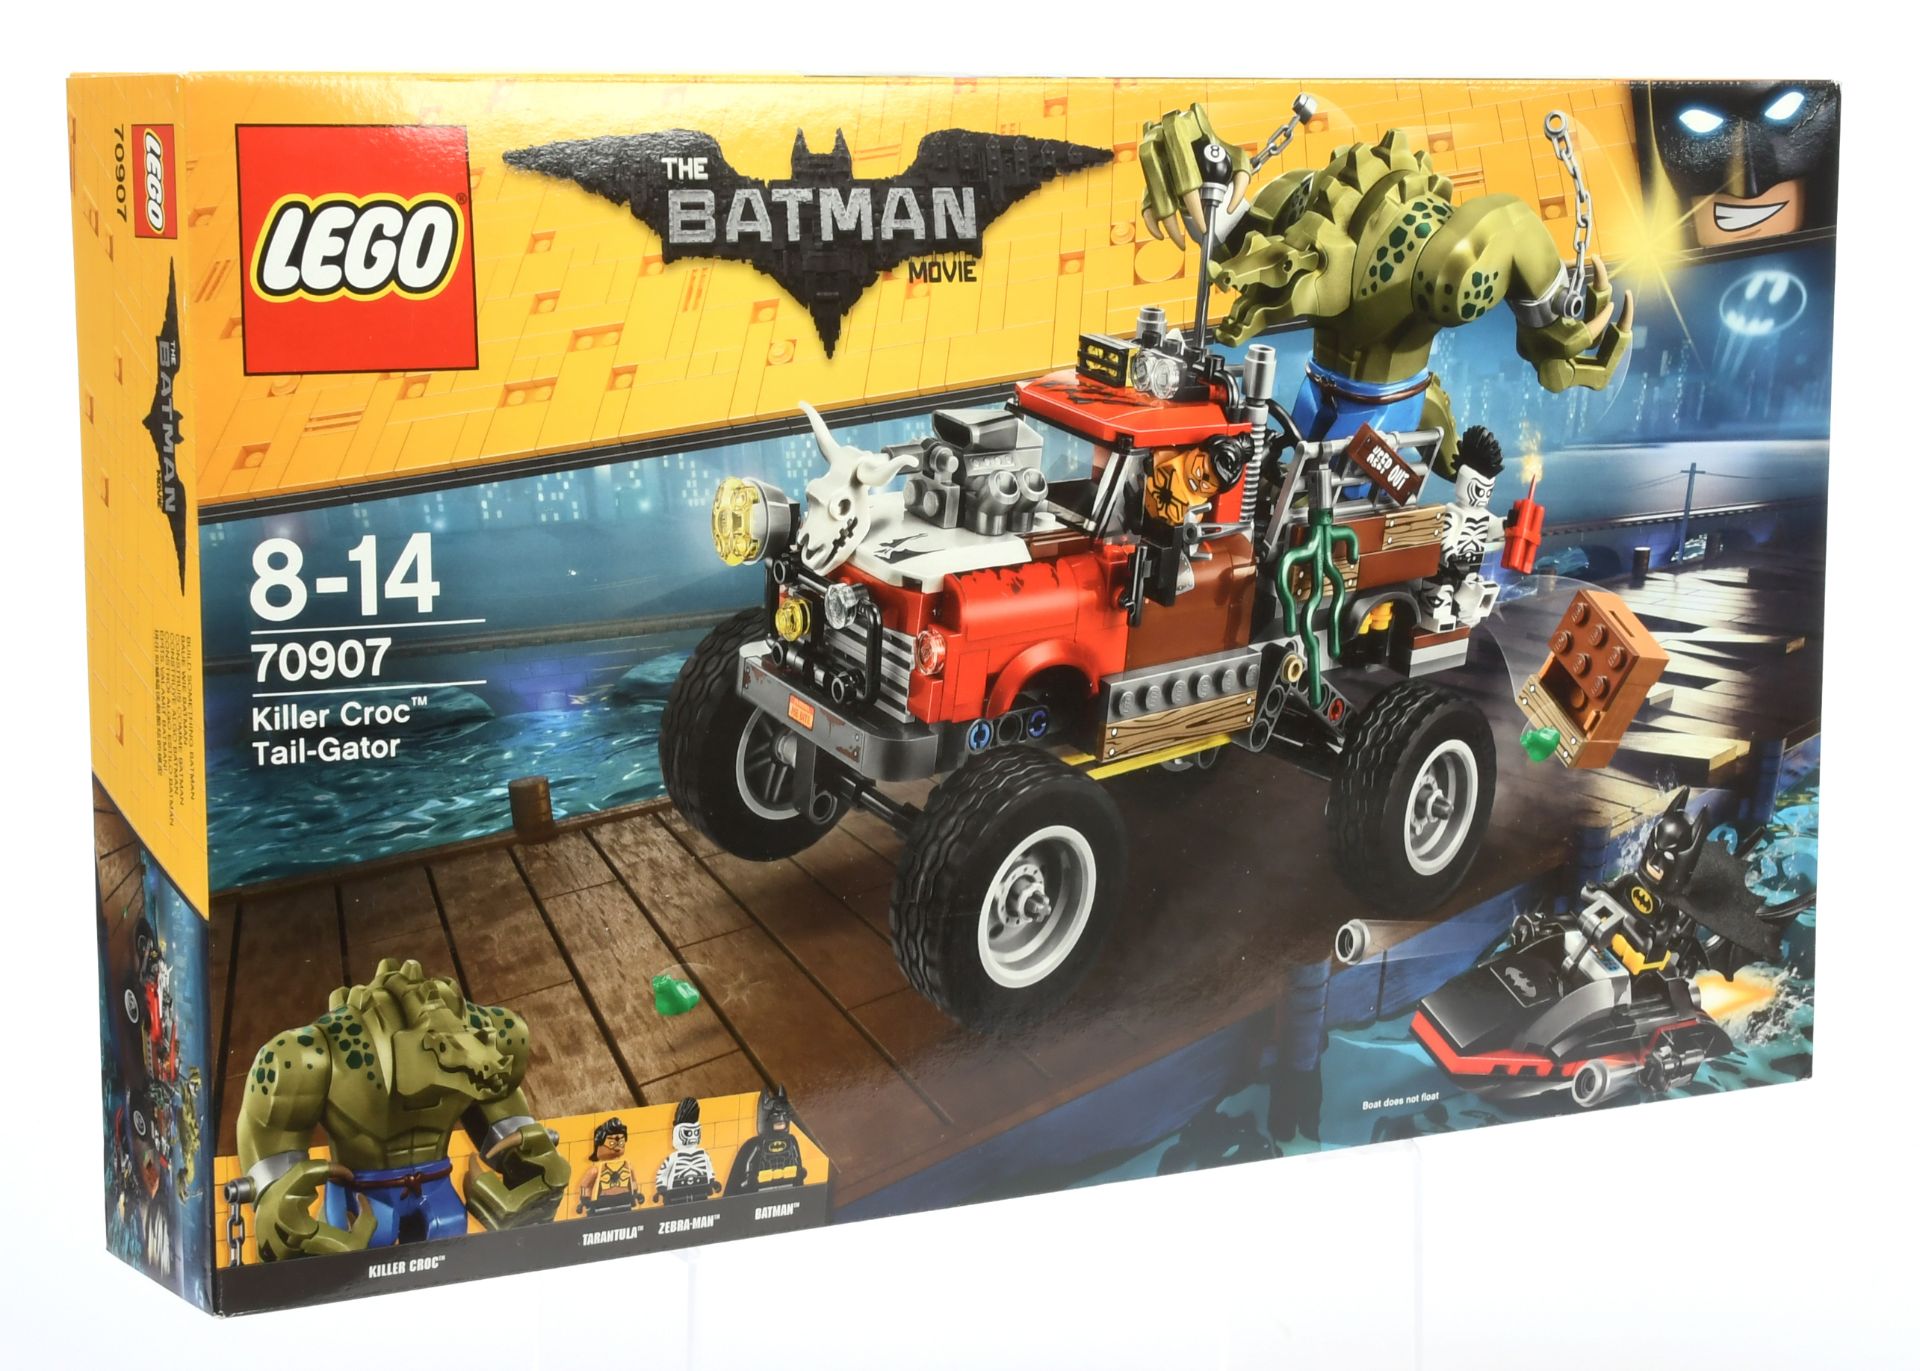 Lego 70915 The Batman Movie - Killer Croc Tail-Gator, within Near Mint sealed packaging.